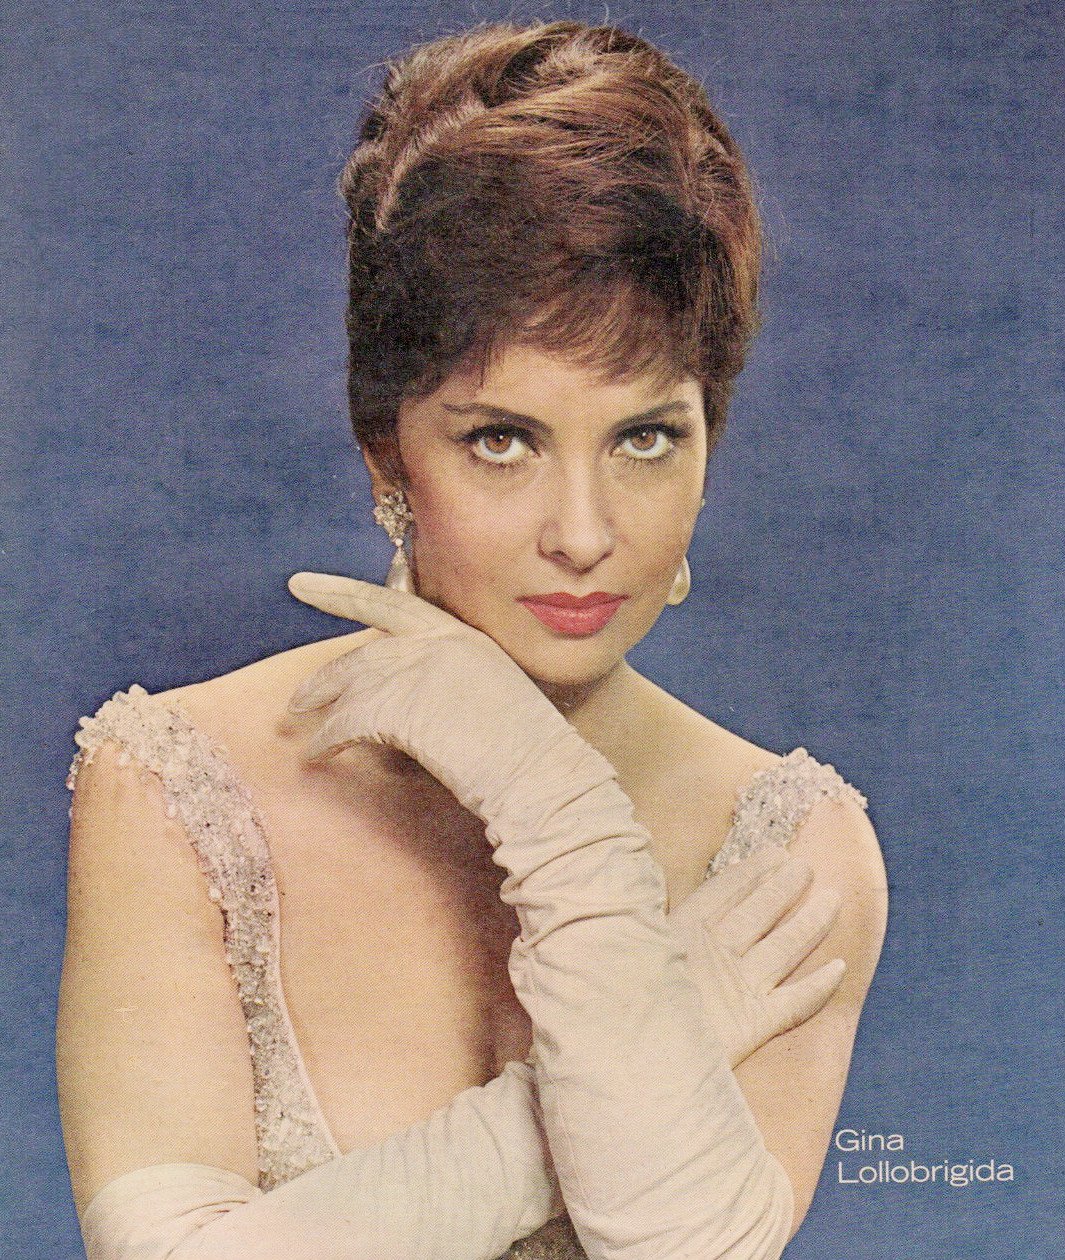 Photo of Gina Lollobrigida from the front cover of the New York Sunday News magazine in 1963. | Source: Wikimedia Commons.